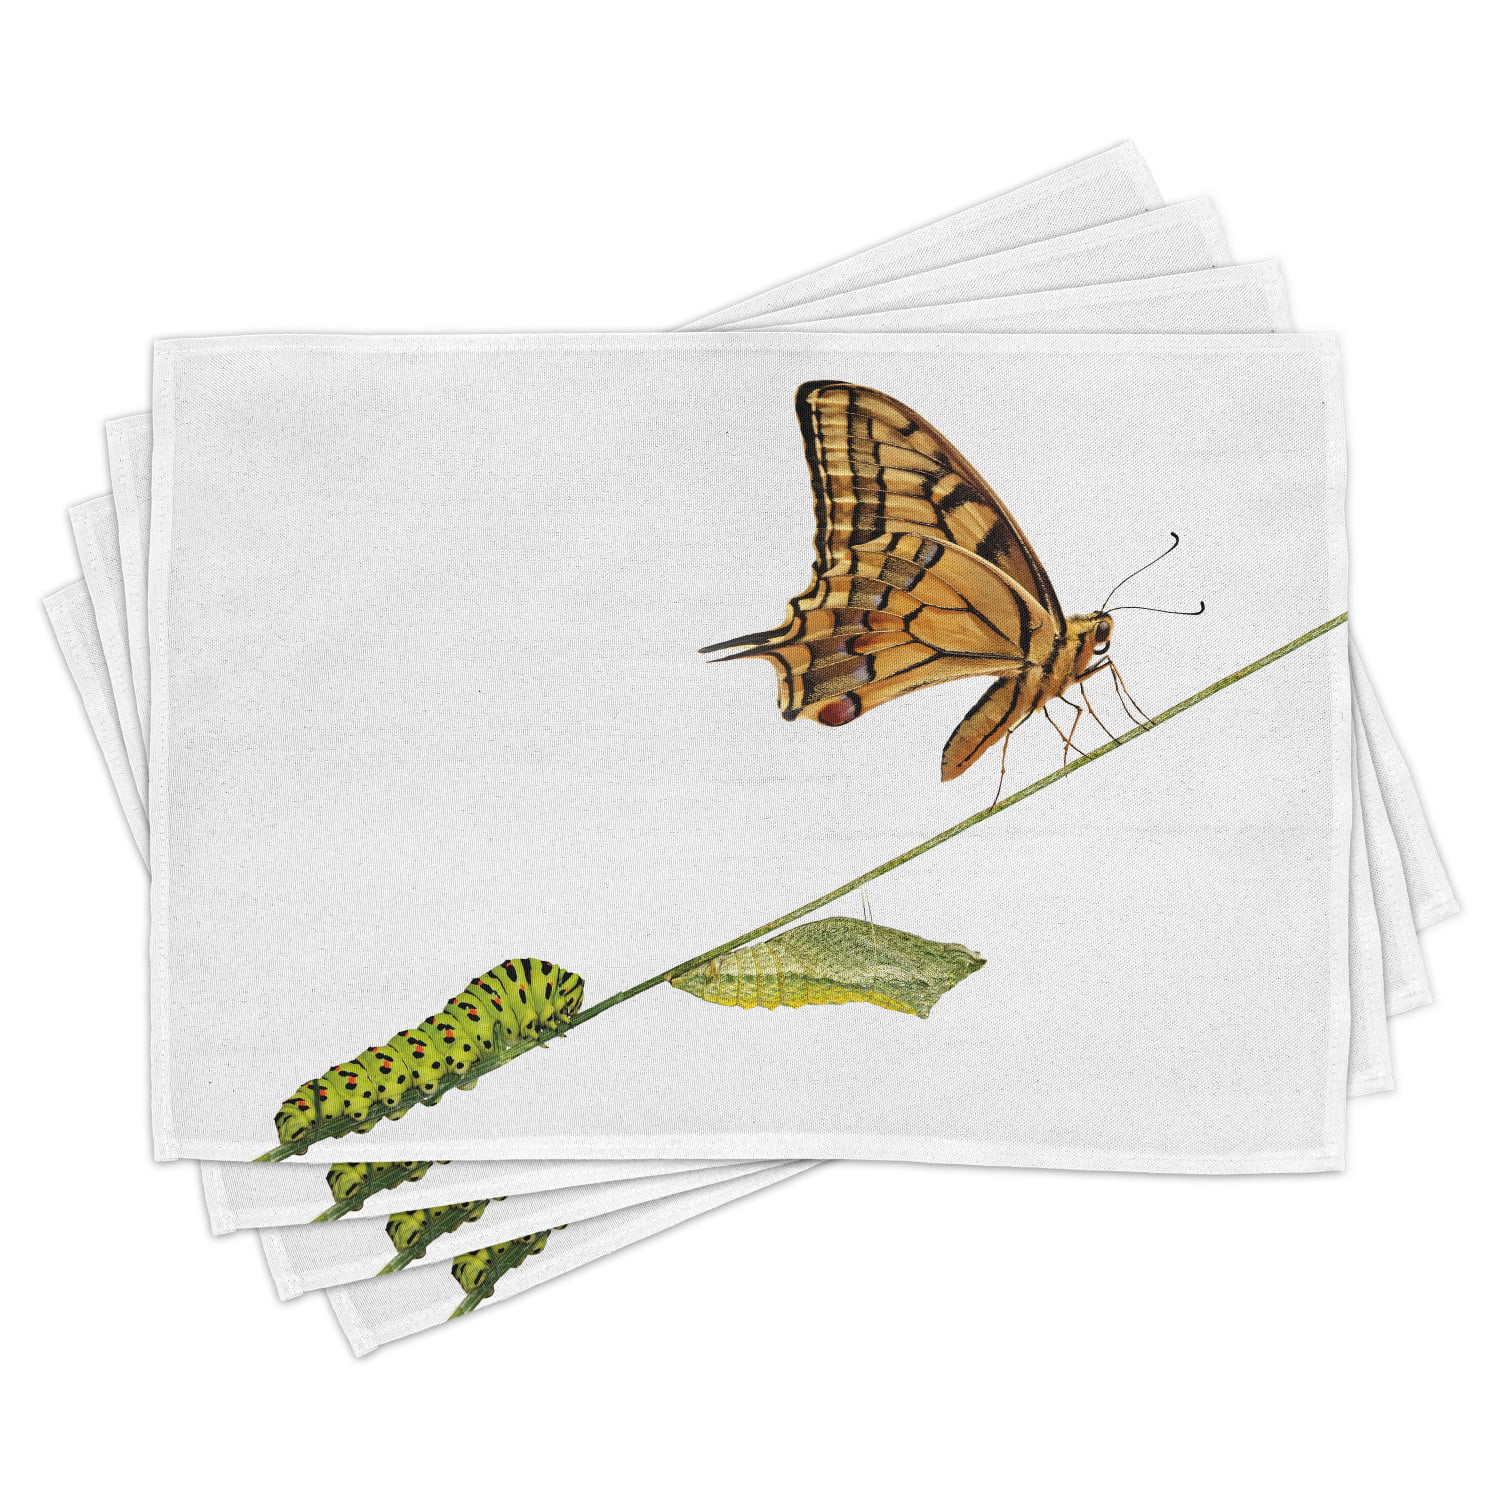 Butterfly Design Set of 4 Placemats Deluxe Vinyl Non-slip Ease Care